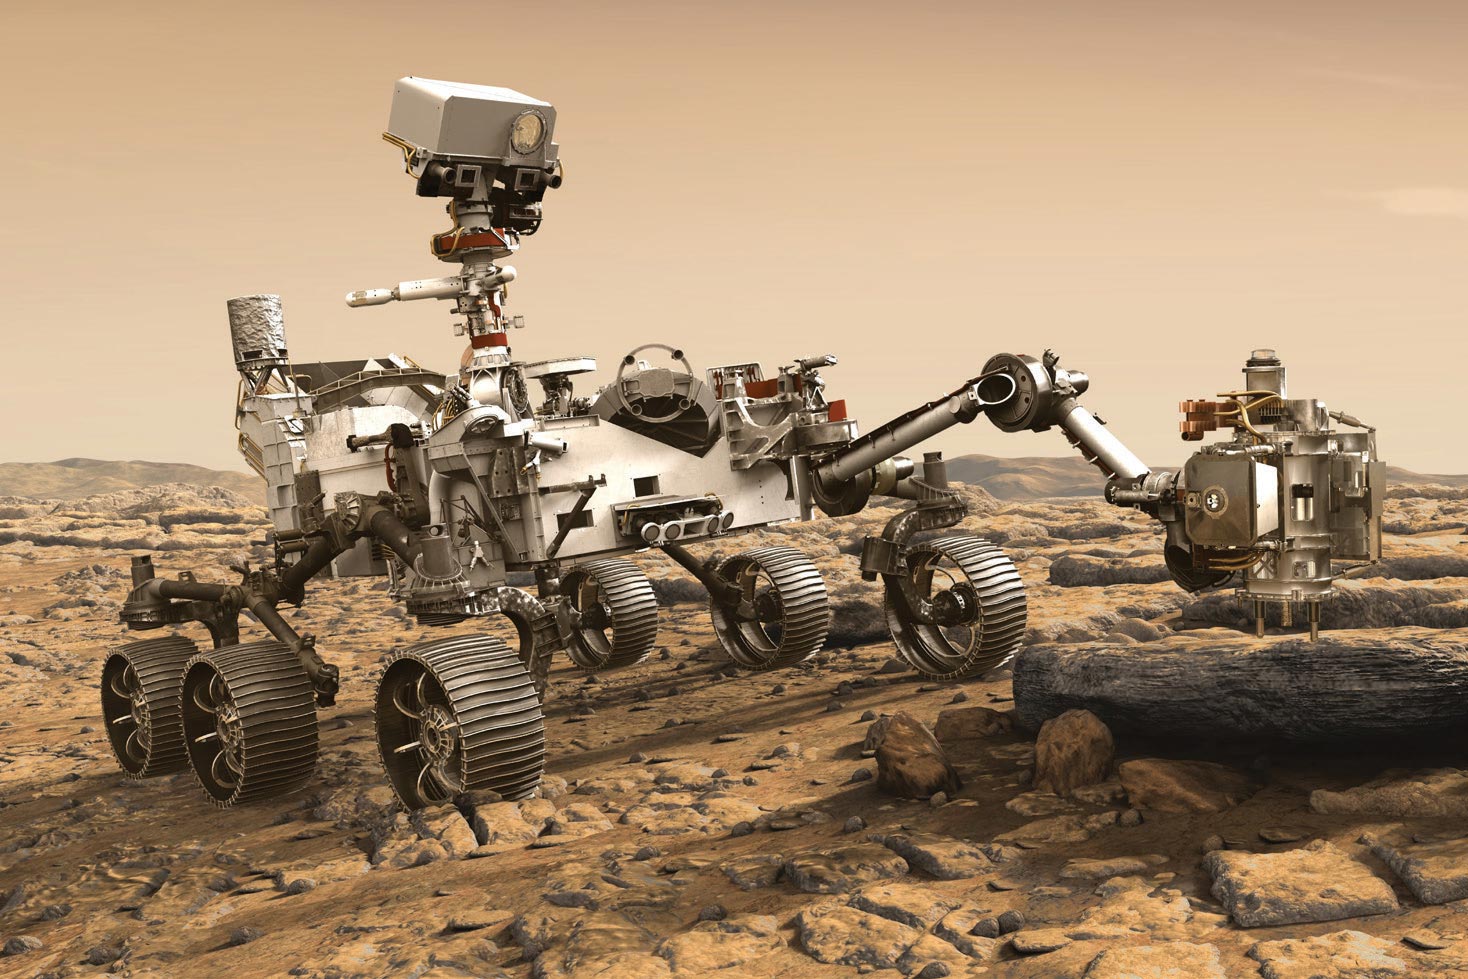 Perseverance Rover Pictures Nasas Perseverance Mars Rover And